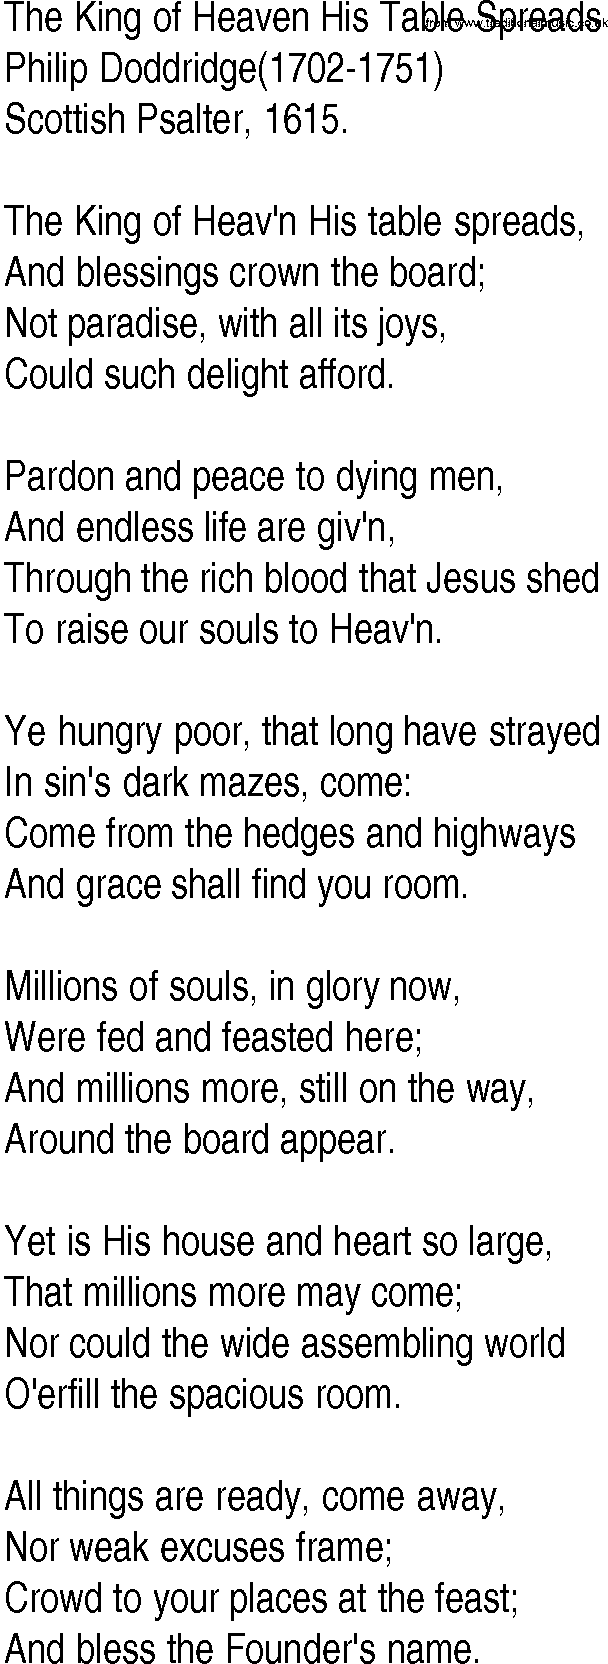 Hymn and Gospel Song: The King of Heaven His Table Spreads by Philip Doddridge lyrics